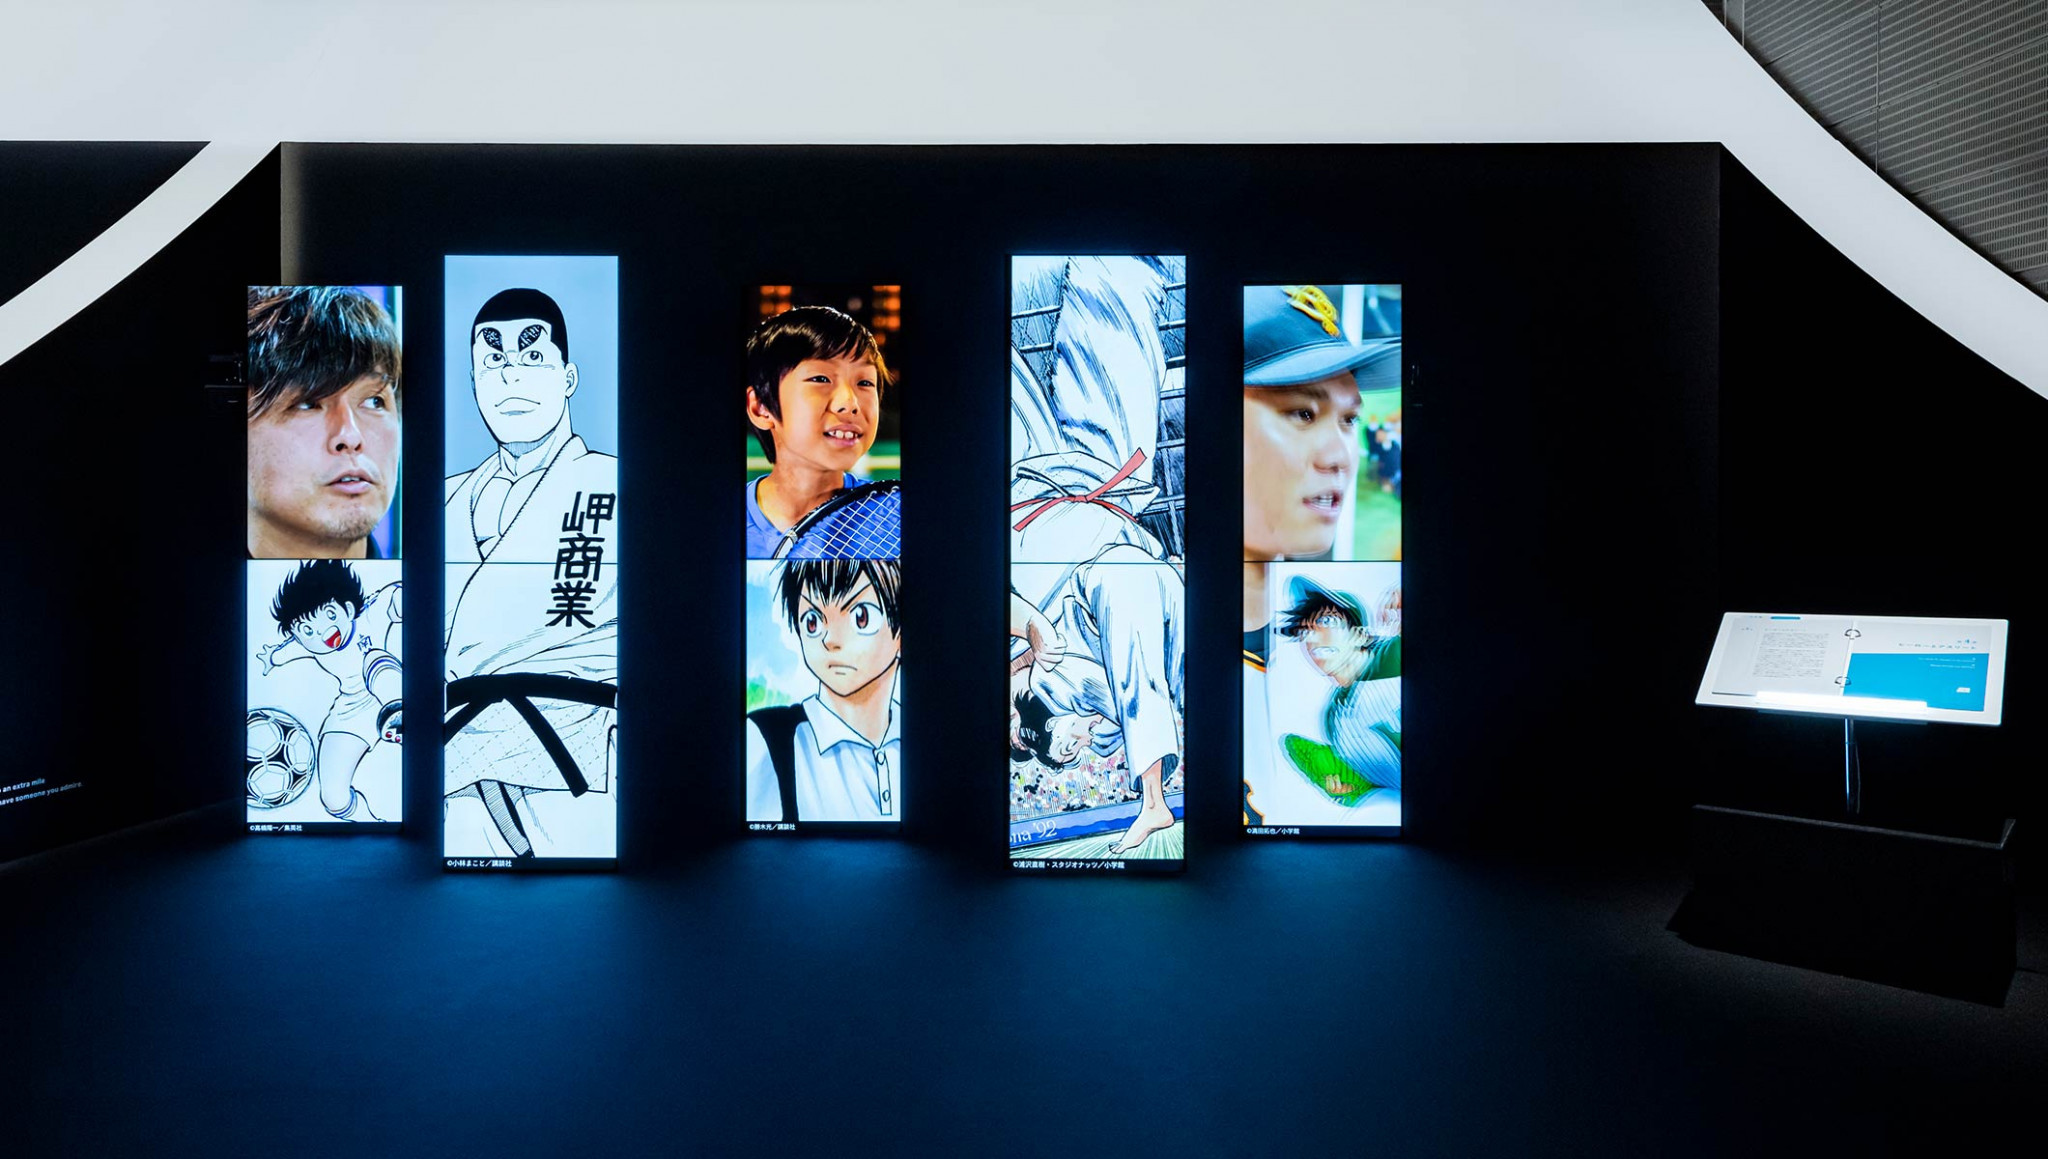 Panasonic hosted a "Sports x Manga" exhibition in Tokyo ©Tokyo 2020